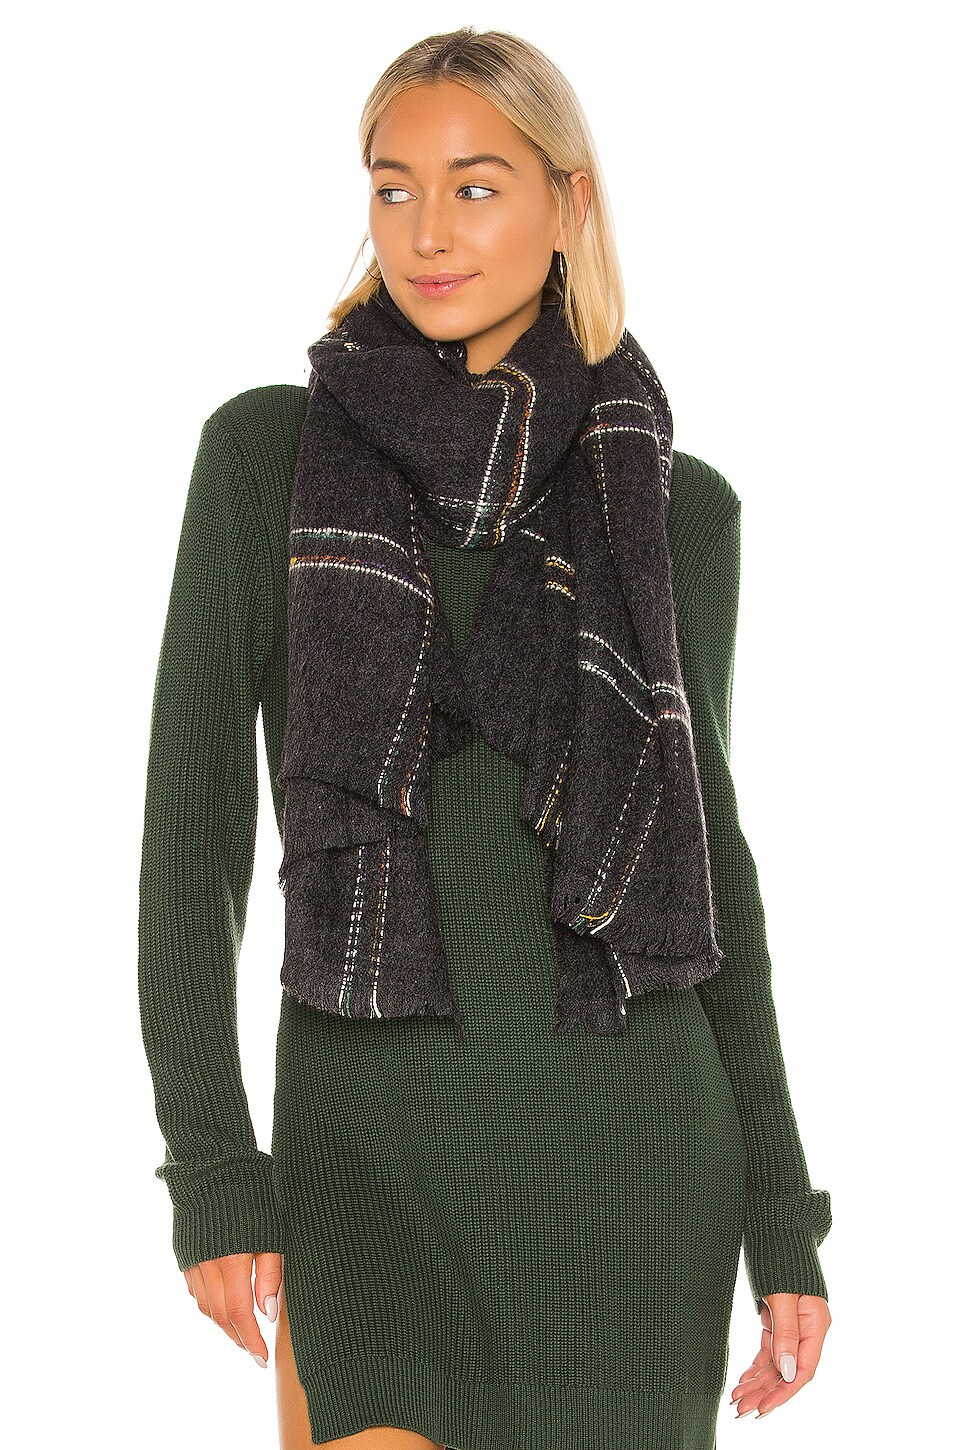 Hat Attack Windowpane Blanket Scarf in Charcoal | REVOLVE